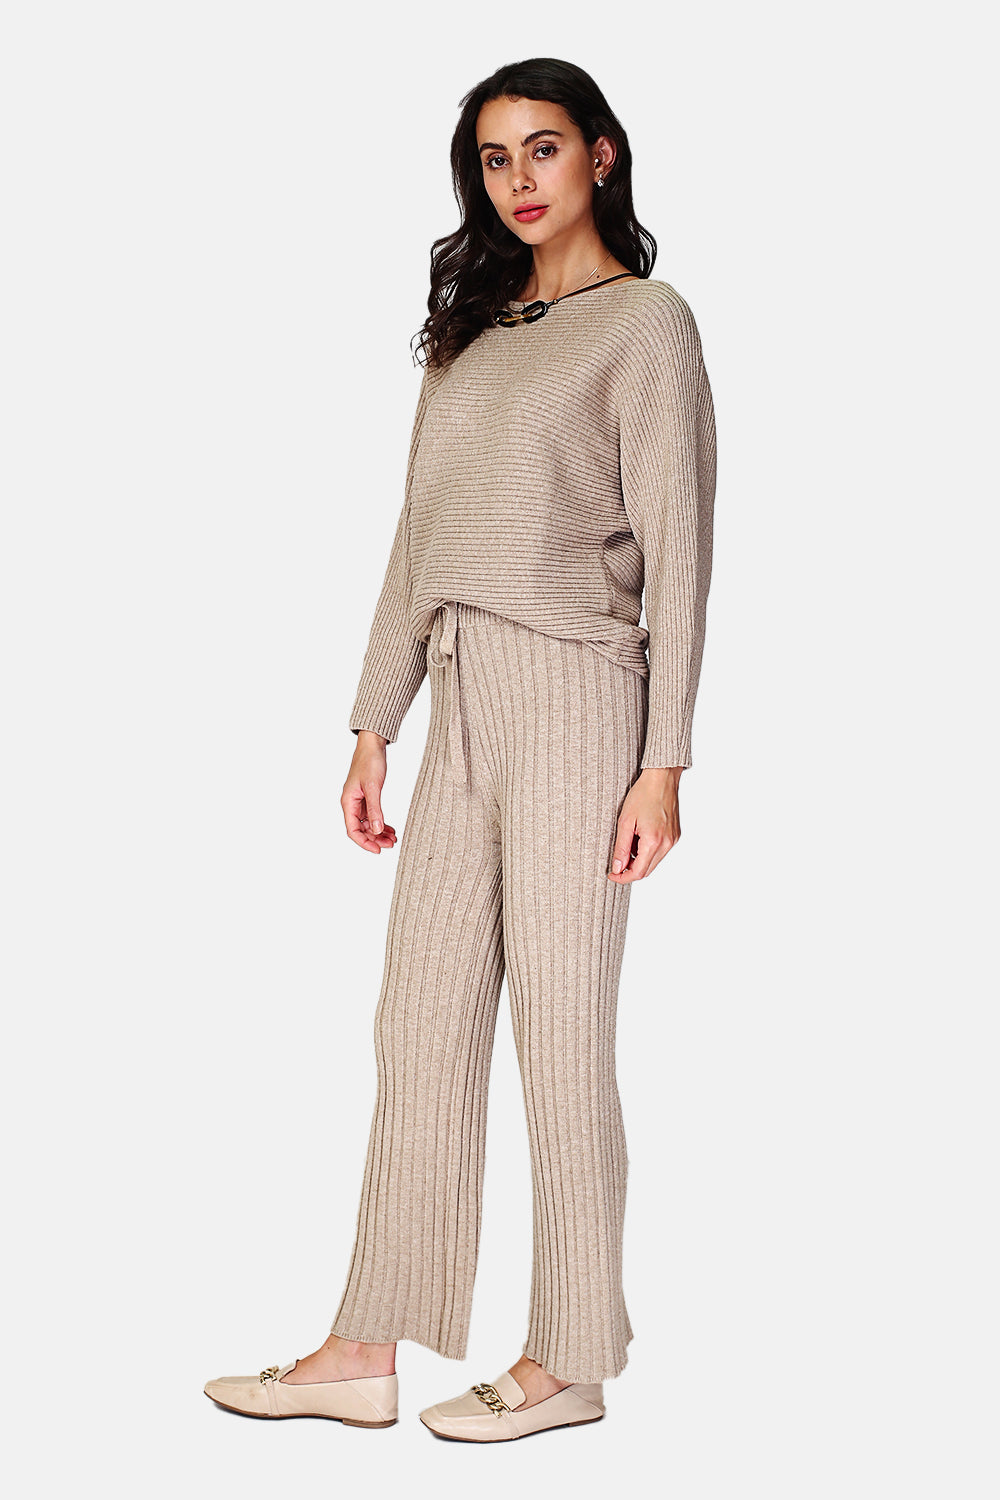 High-waisted knitted knit pants, wide bottom in English rib